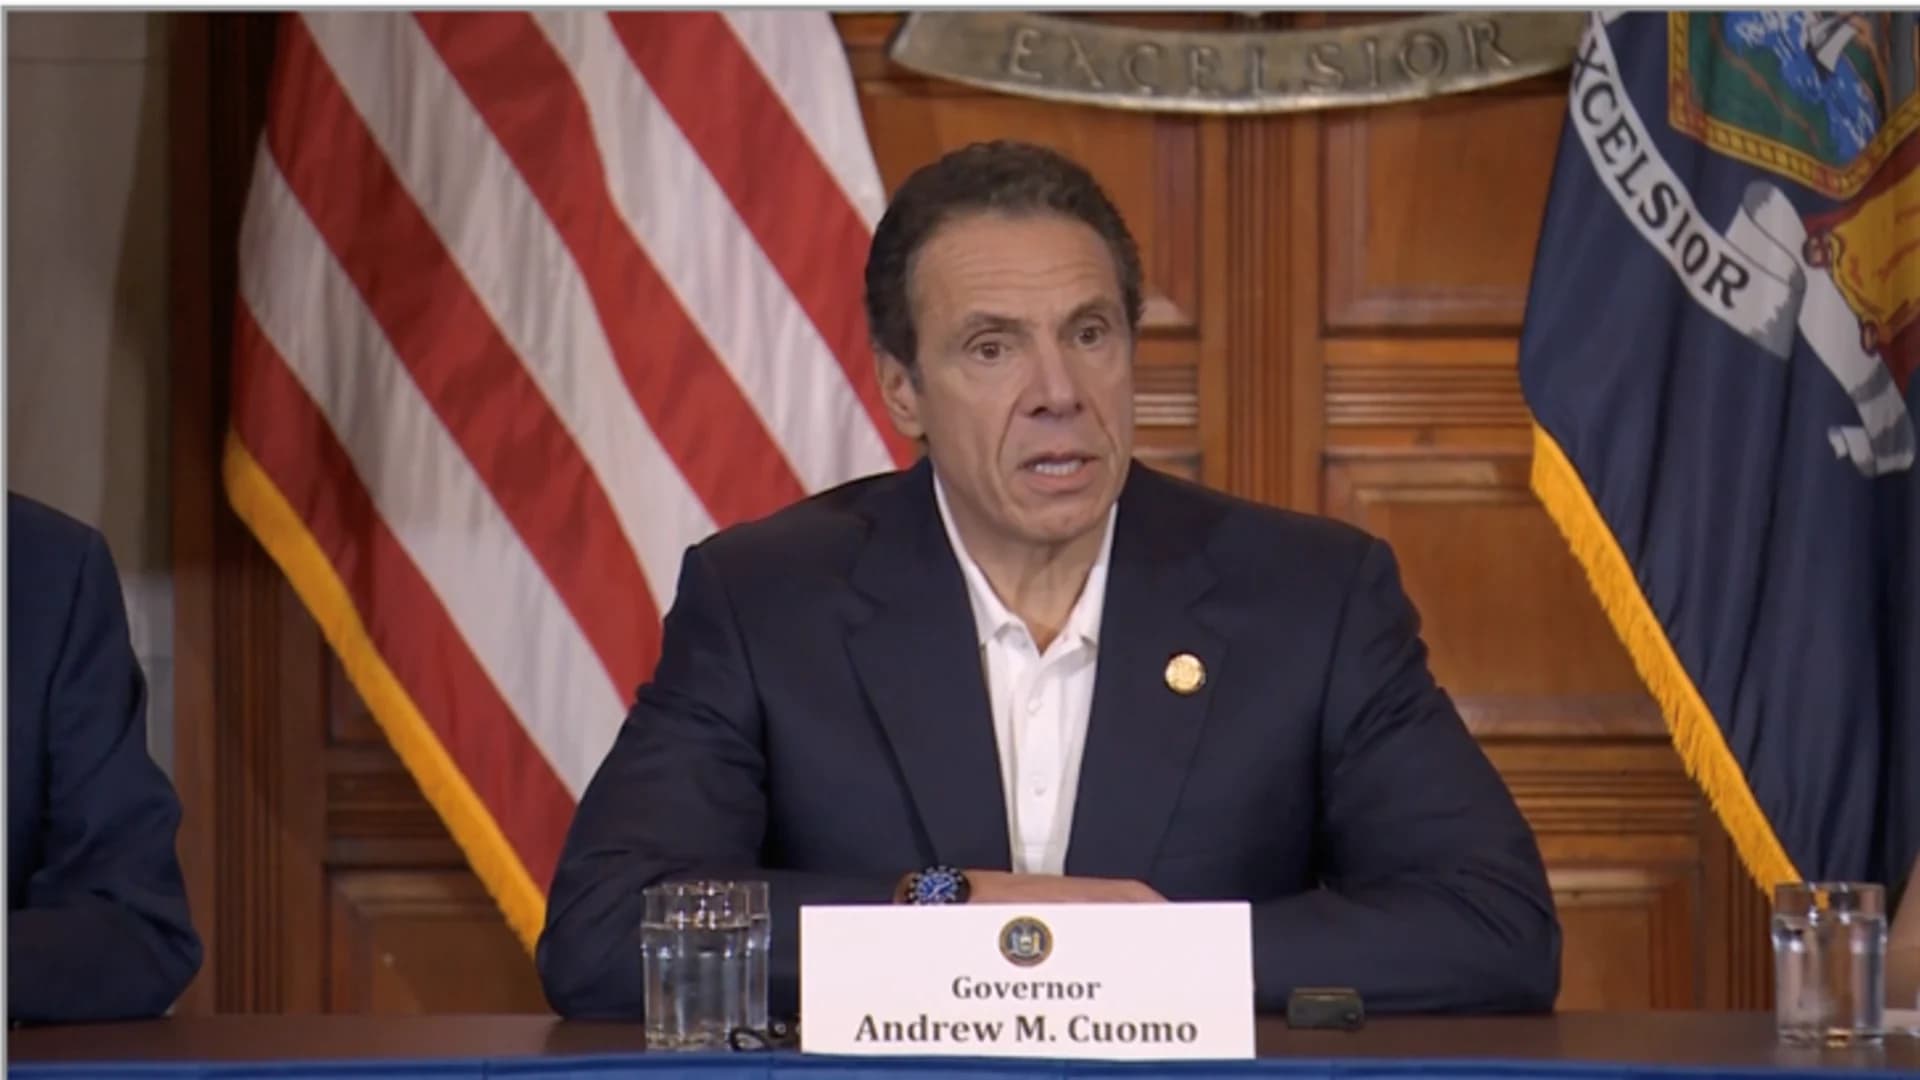 Cuomo says plan for NY to do its own testing will expand capacity; coronavirus cases in state are at 421